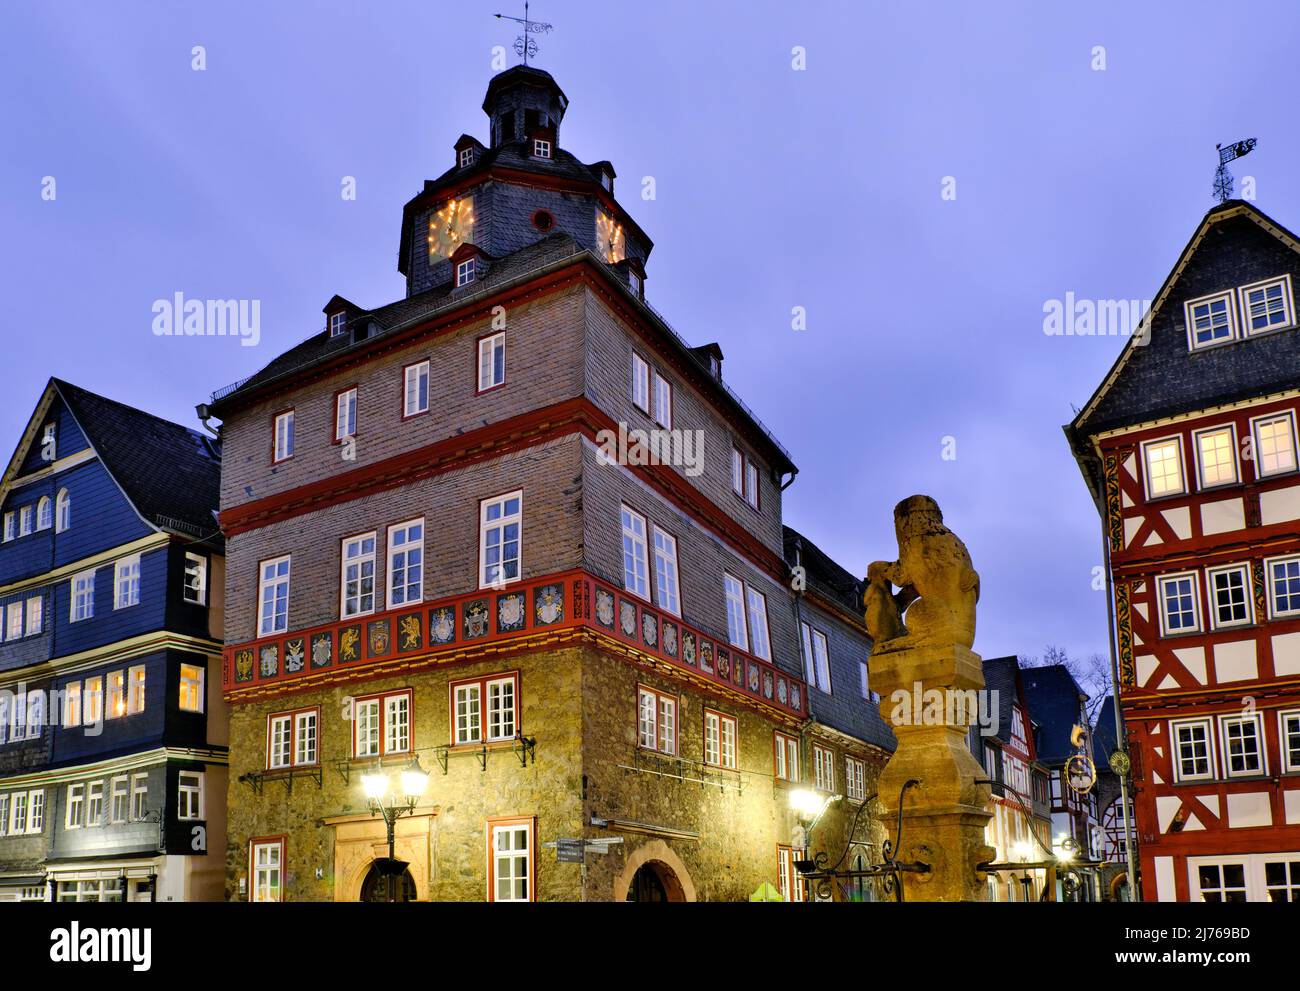 Europe, Germany, Hesse, city of Herborn, historical old town, Christmas, Christmas lights, town hall at market place, lion fountain Stock Photo